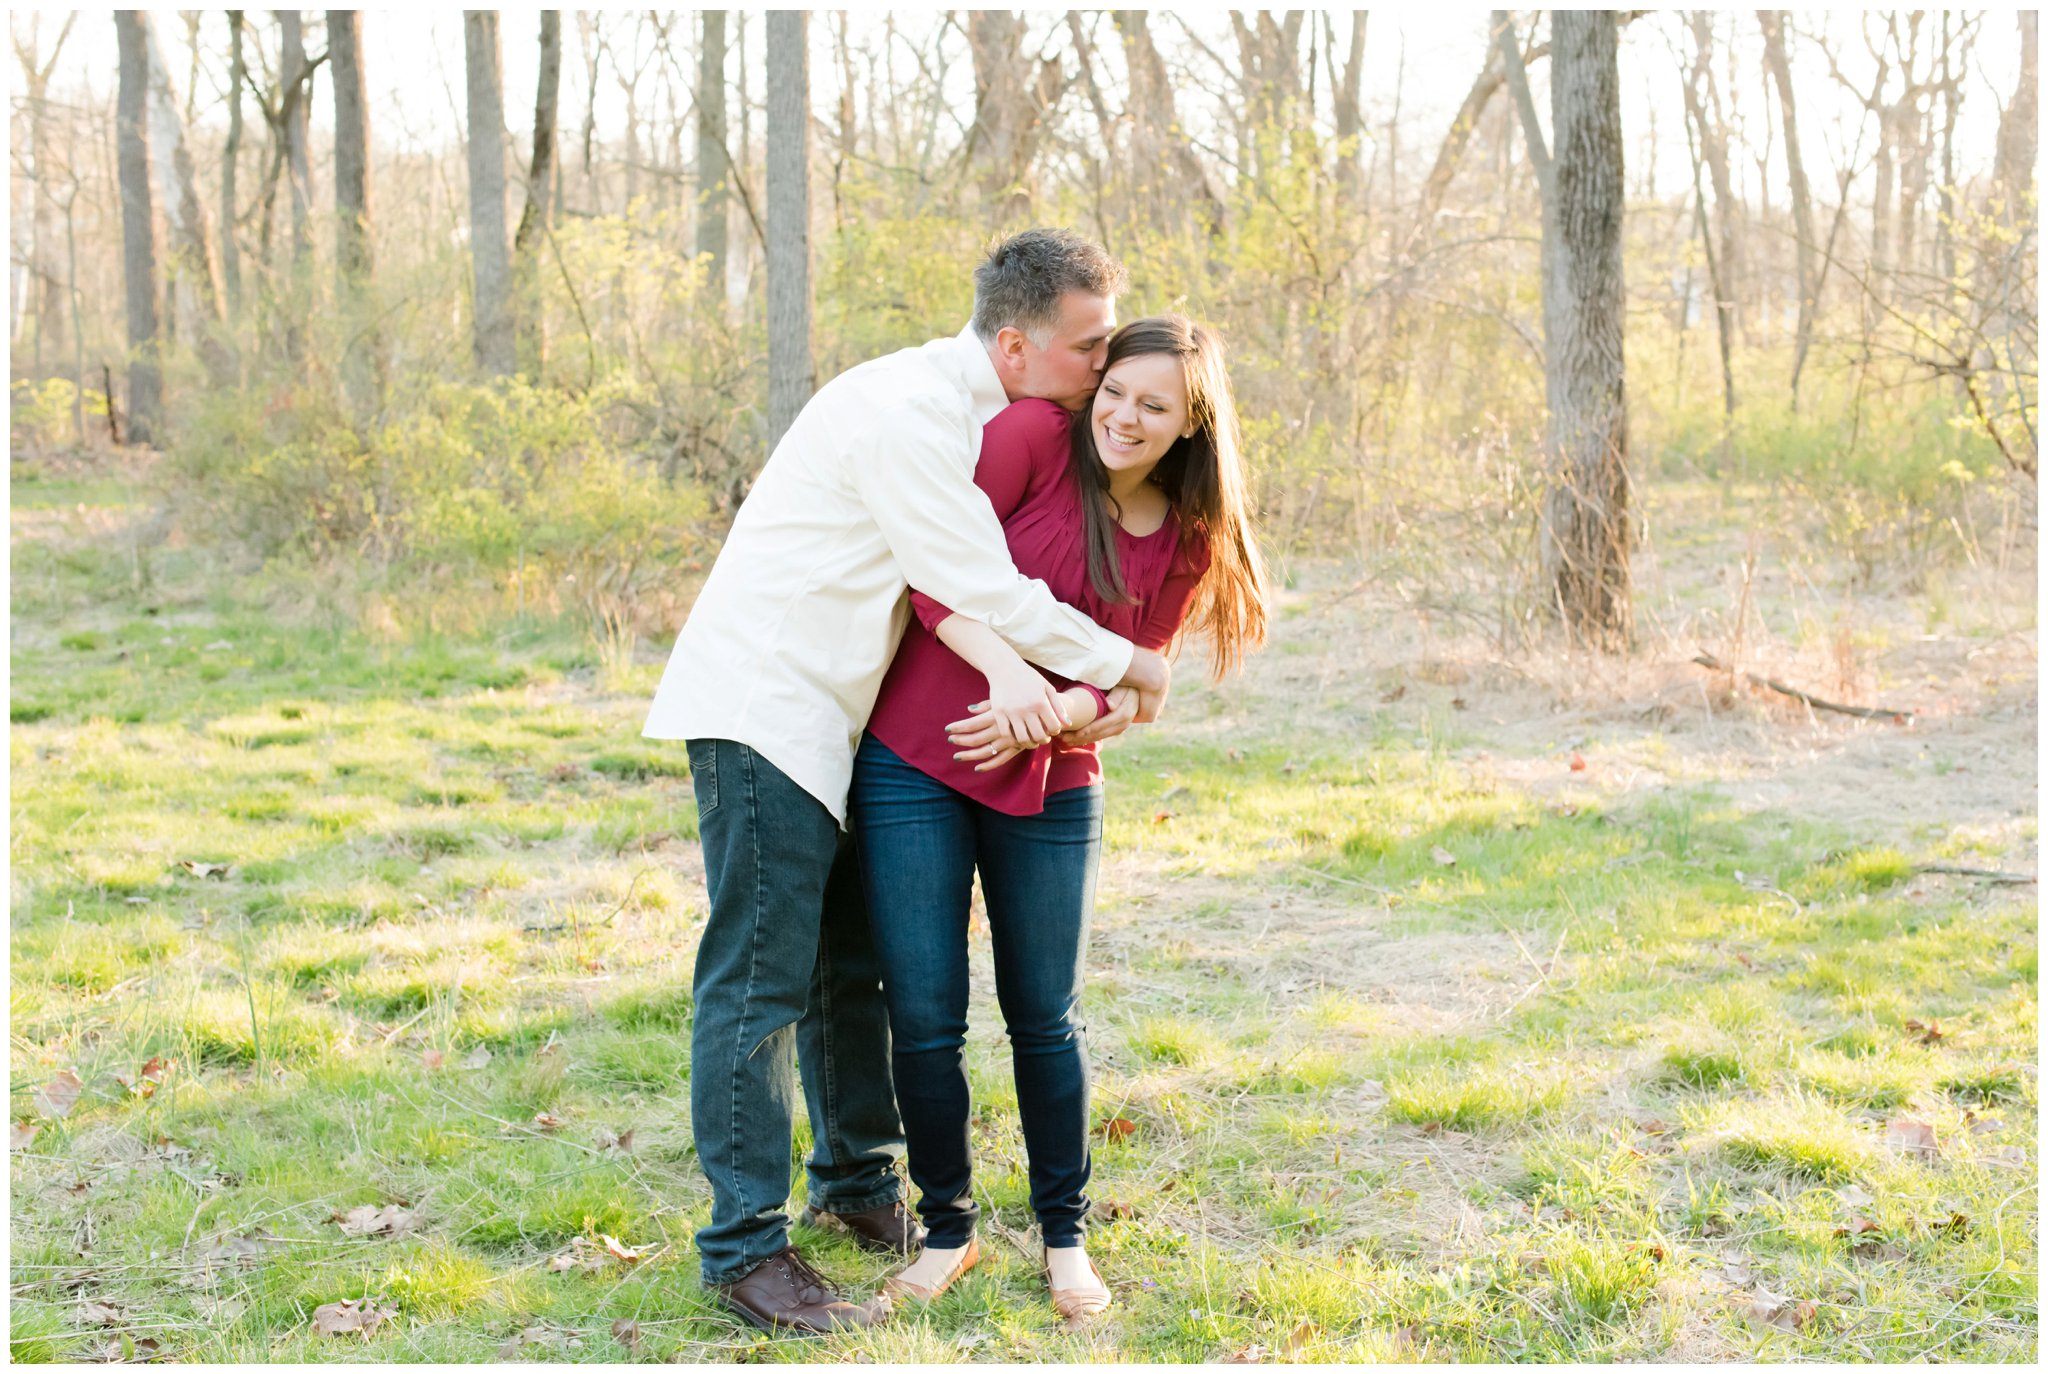 Allentown, PA Engagement Session - Laura Lee Photography